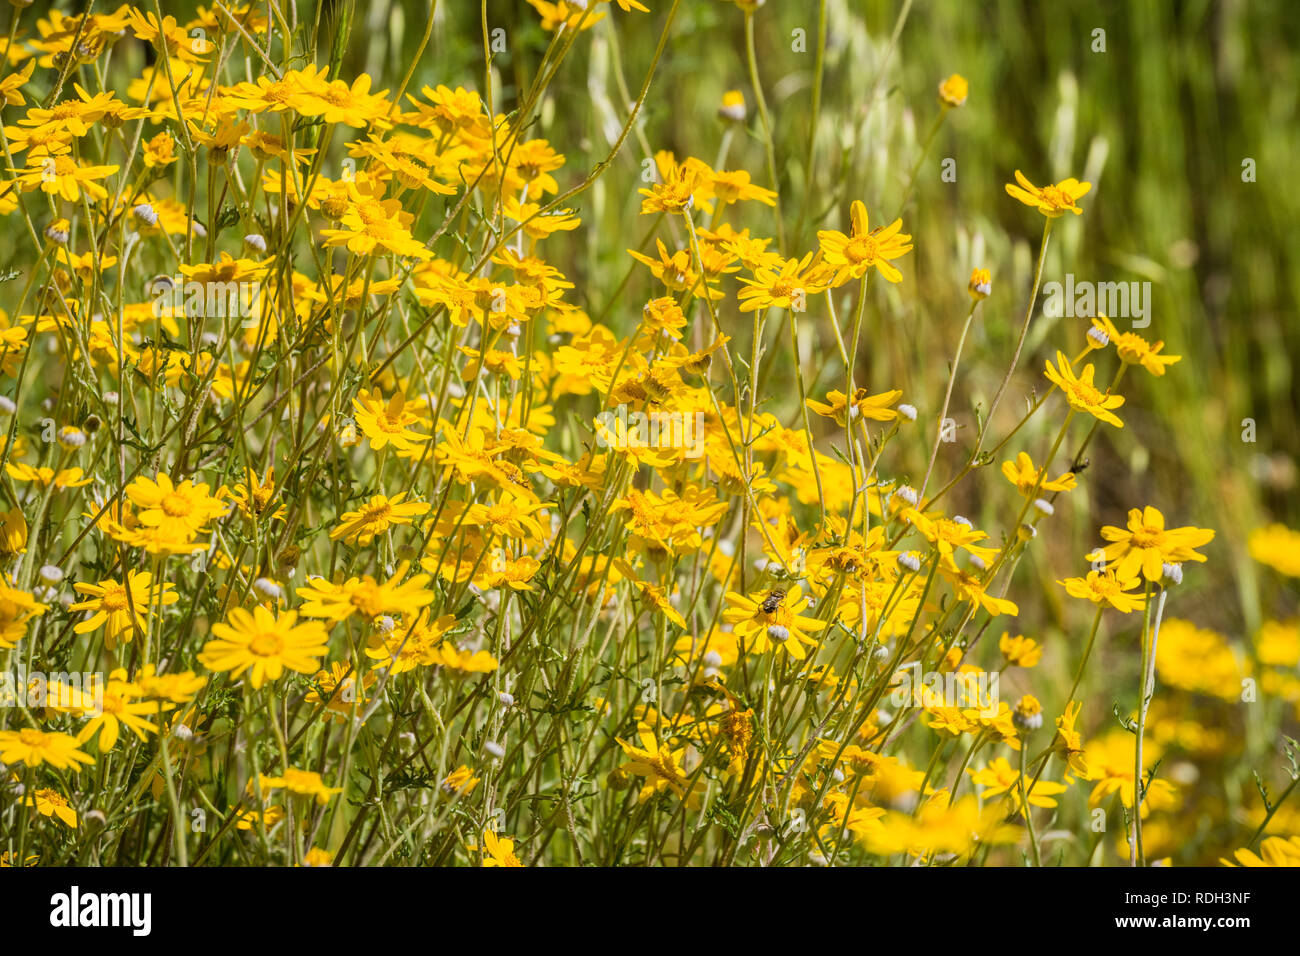 Common woolly sunflower (Eriophyllum lanatum) blooming in Stebbins Cold Canyon, Napa Valley, California Stock Photo